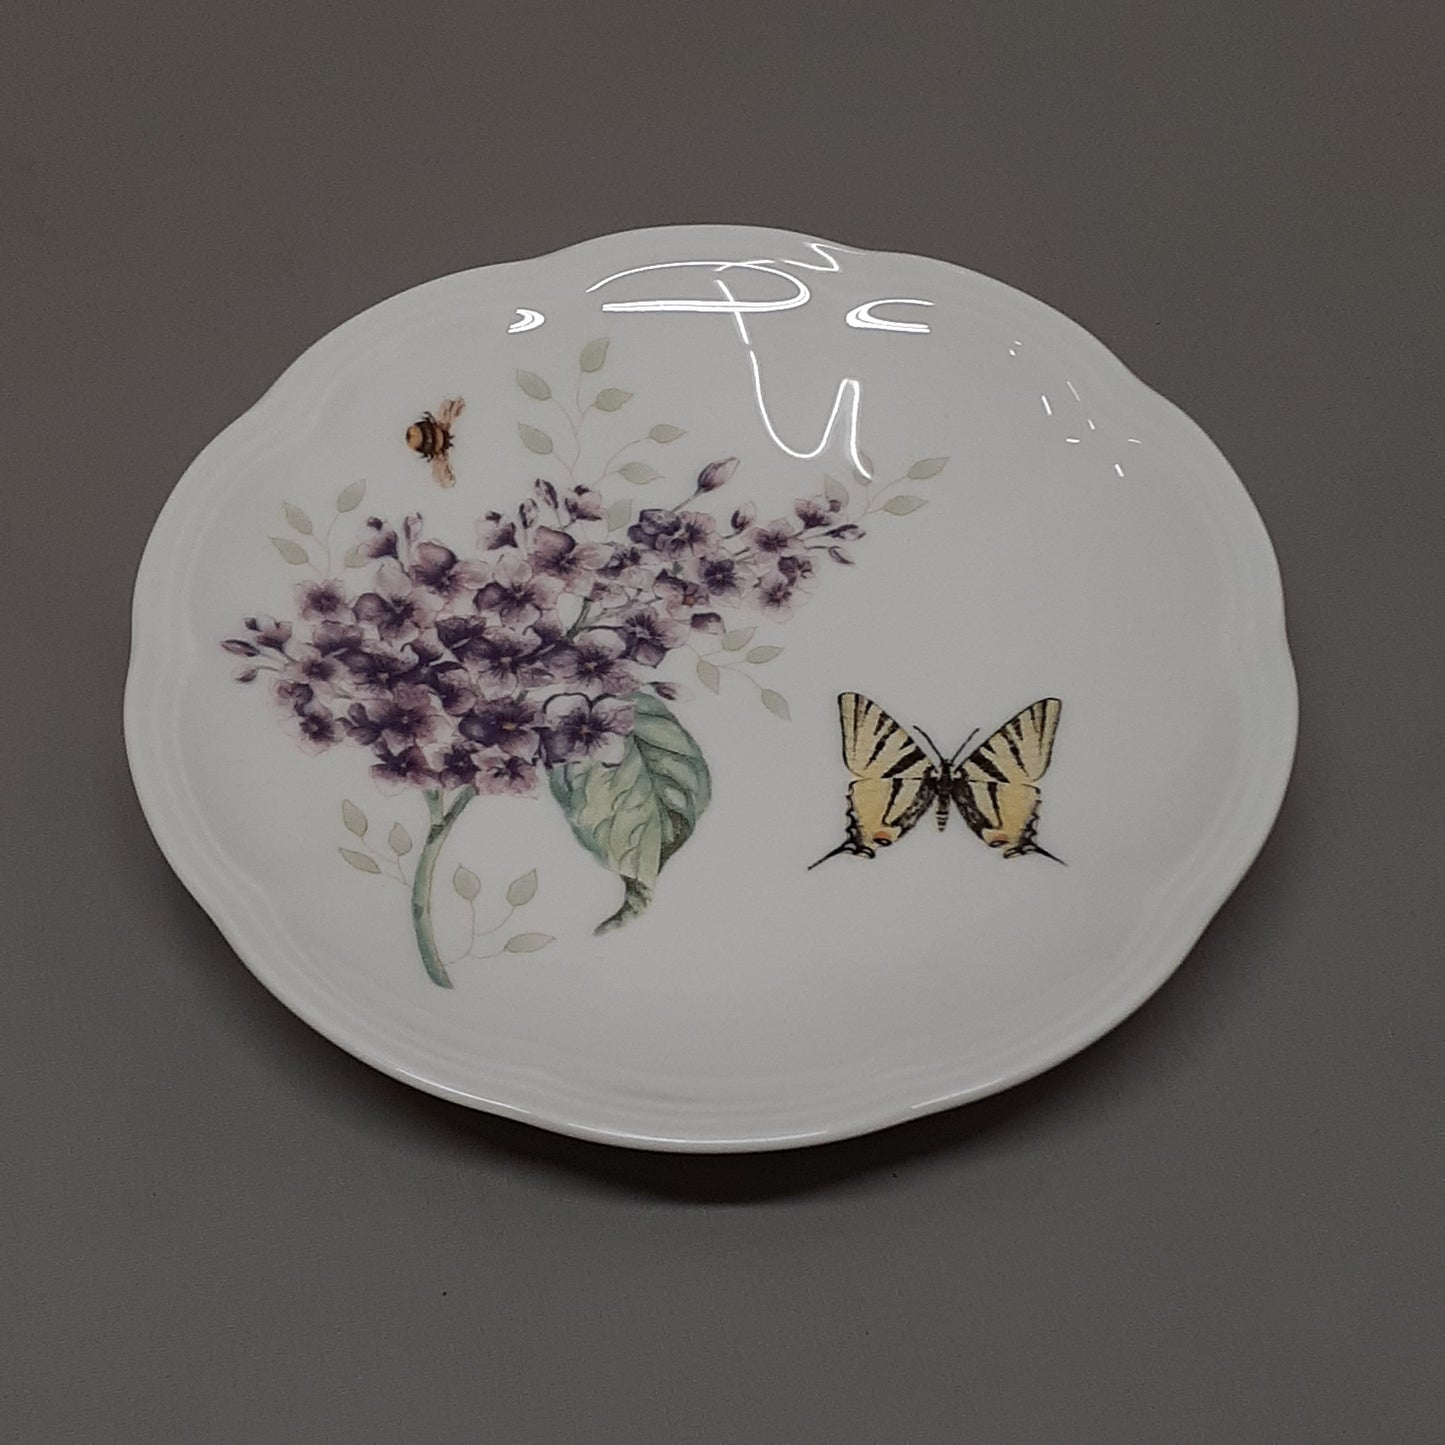 LENOX Butterfly Meadow Tiger Swallowtail Party Plates Set of 6 (New)